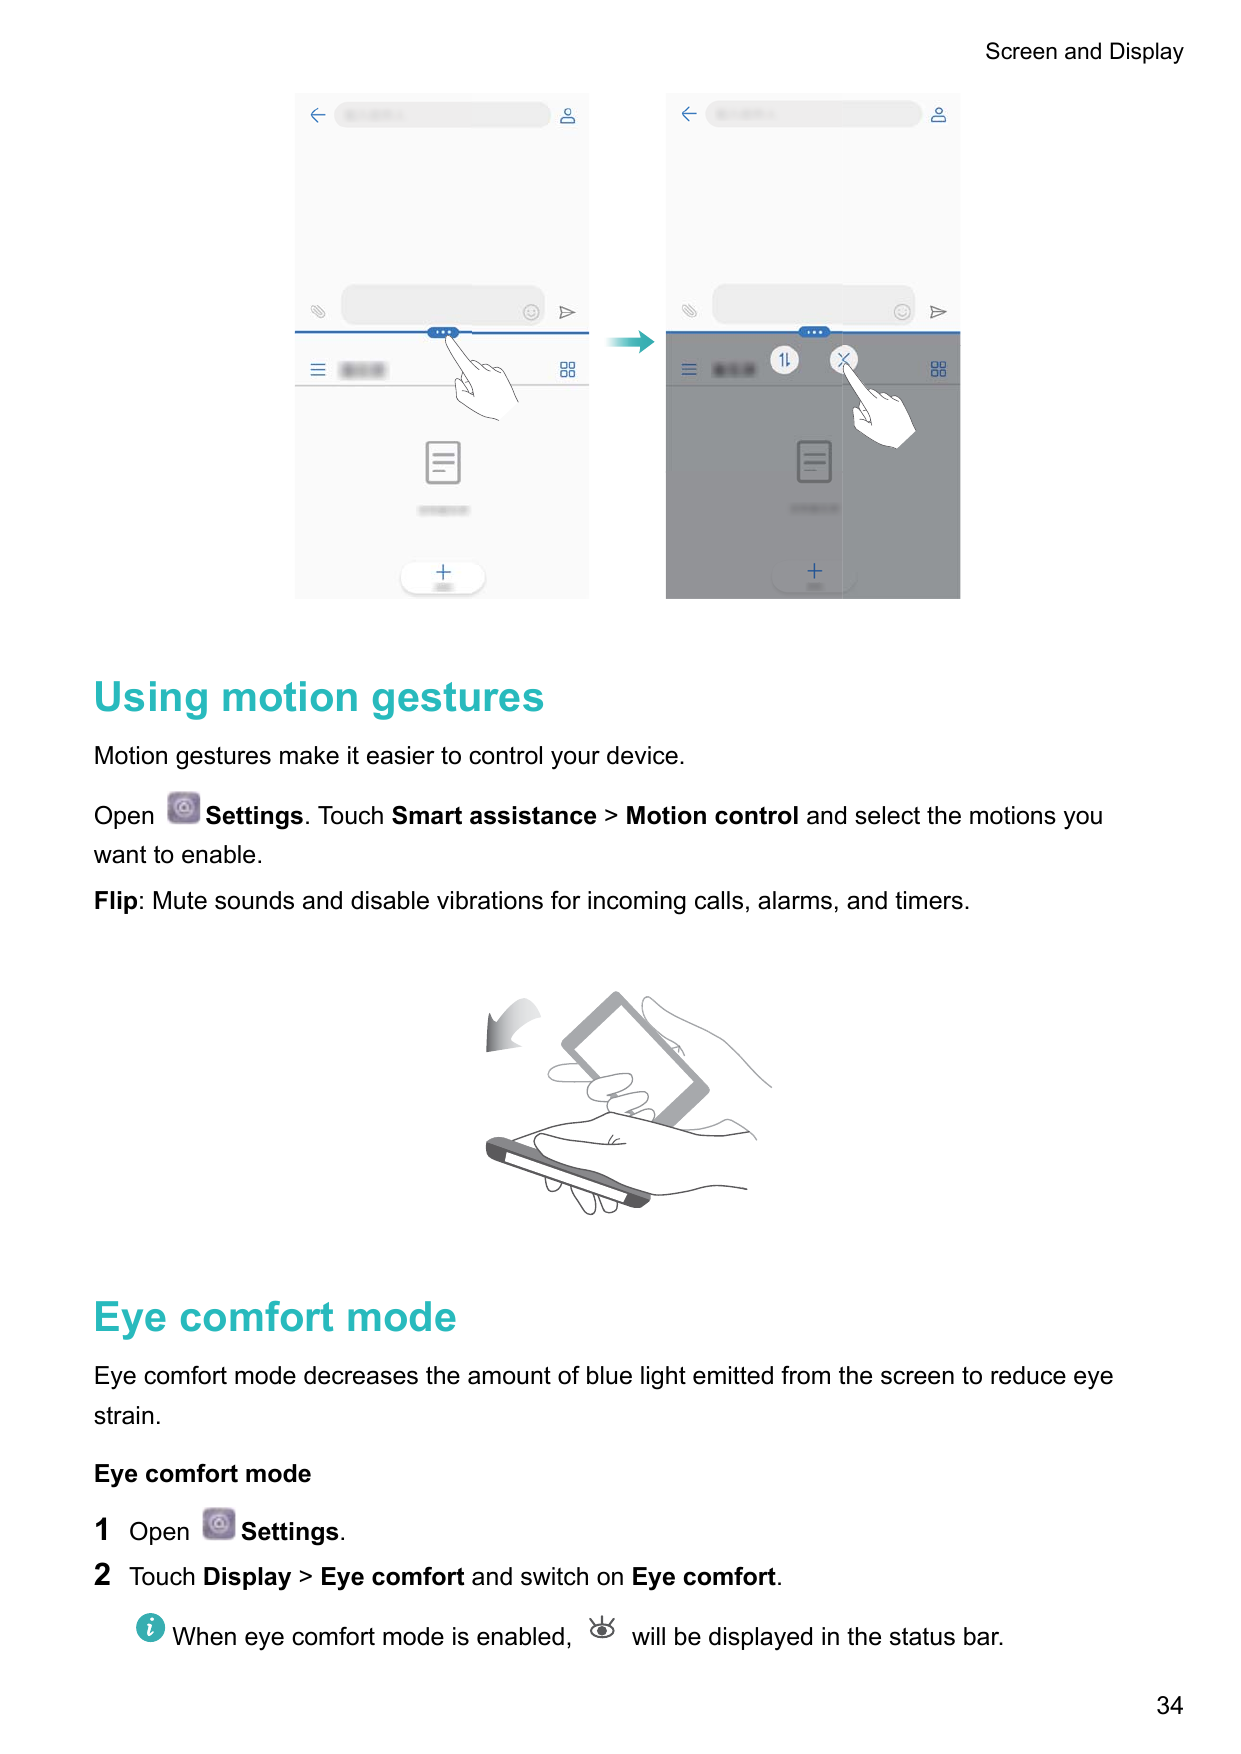 Screen and DisplayUsing motion gesturesMotion gestures make it easier to control your device.Settings. Touch Smart assistance > 